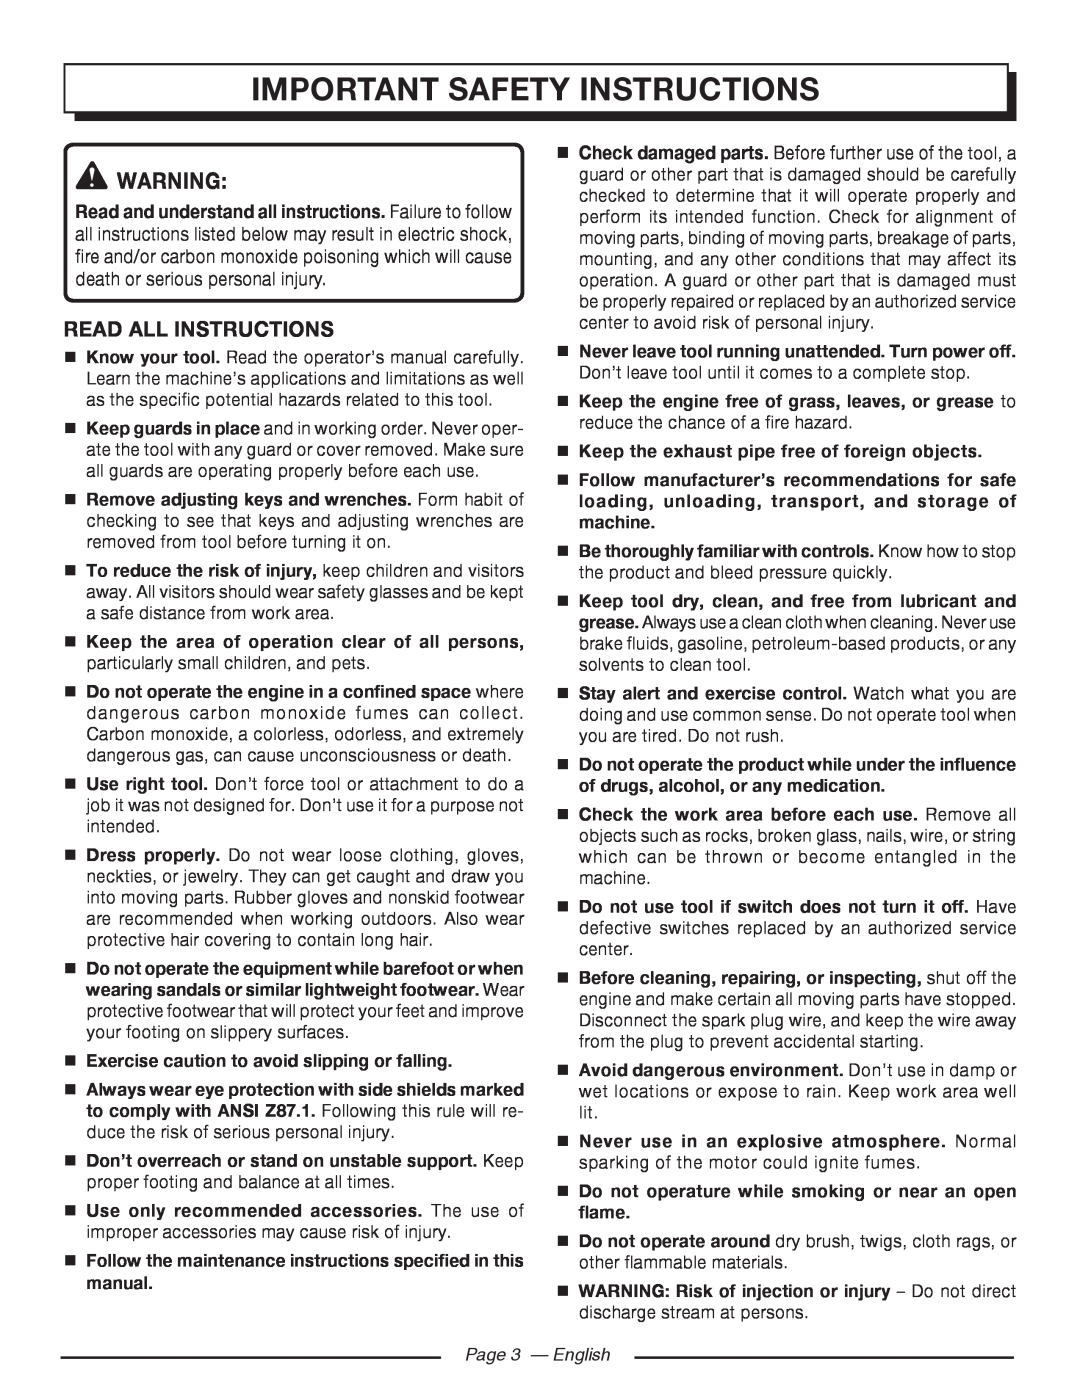 Homelite UT80516 important safety instructions, Read All Instructions,  Exercise caution to avoid slipping or falling 